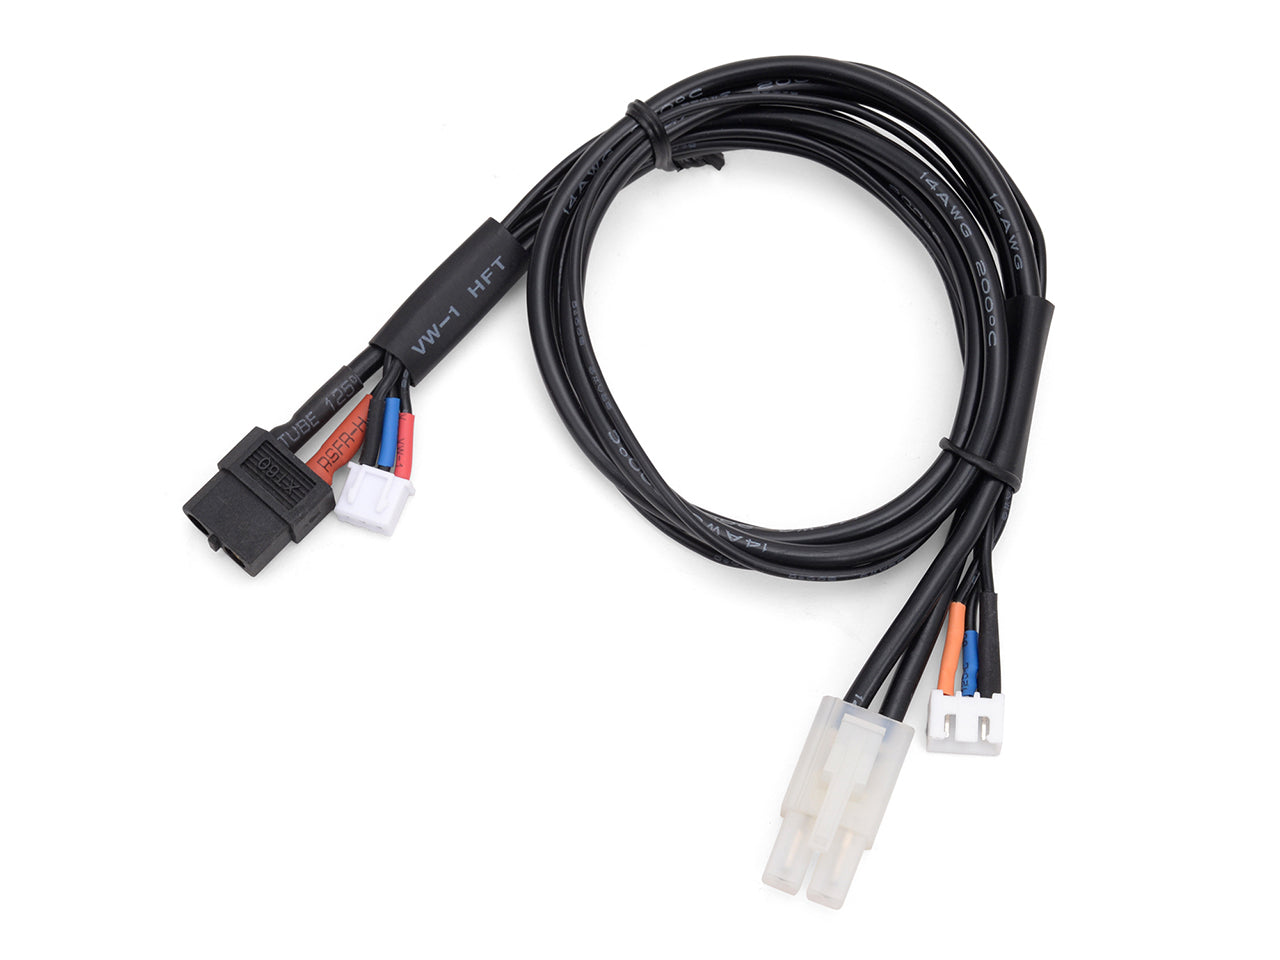 G0287 XT60/Tamiya type connector 2S charging cable (50cm)